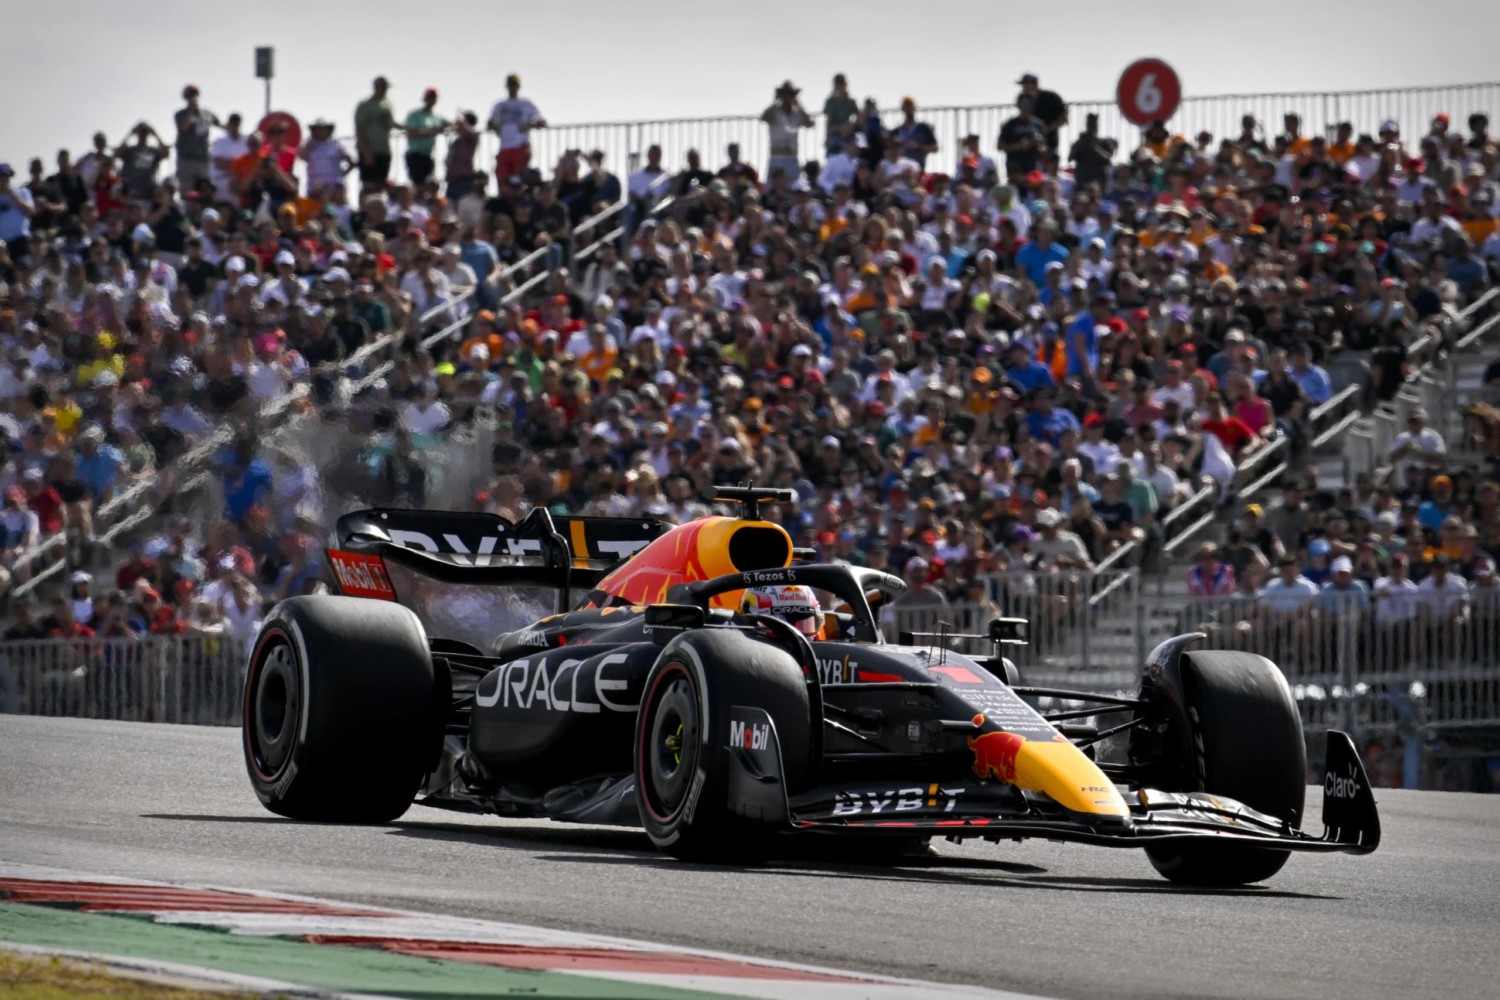 Red Bull races in Formula 1.